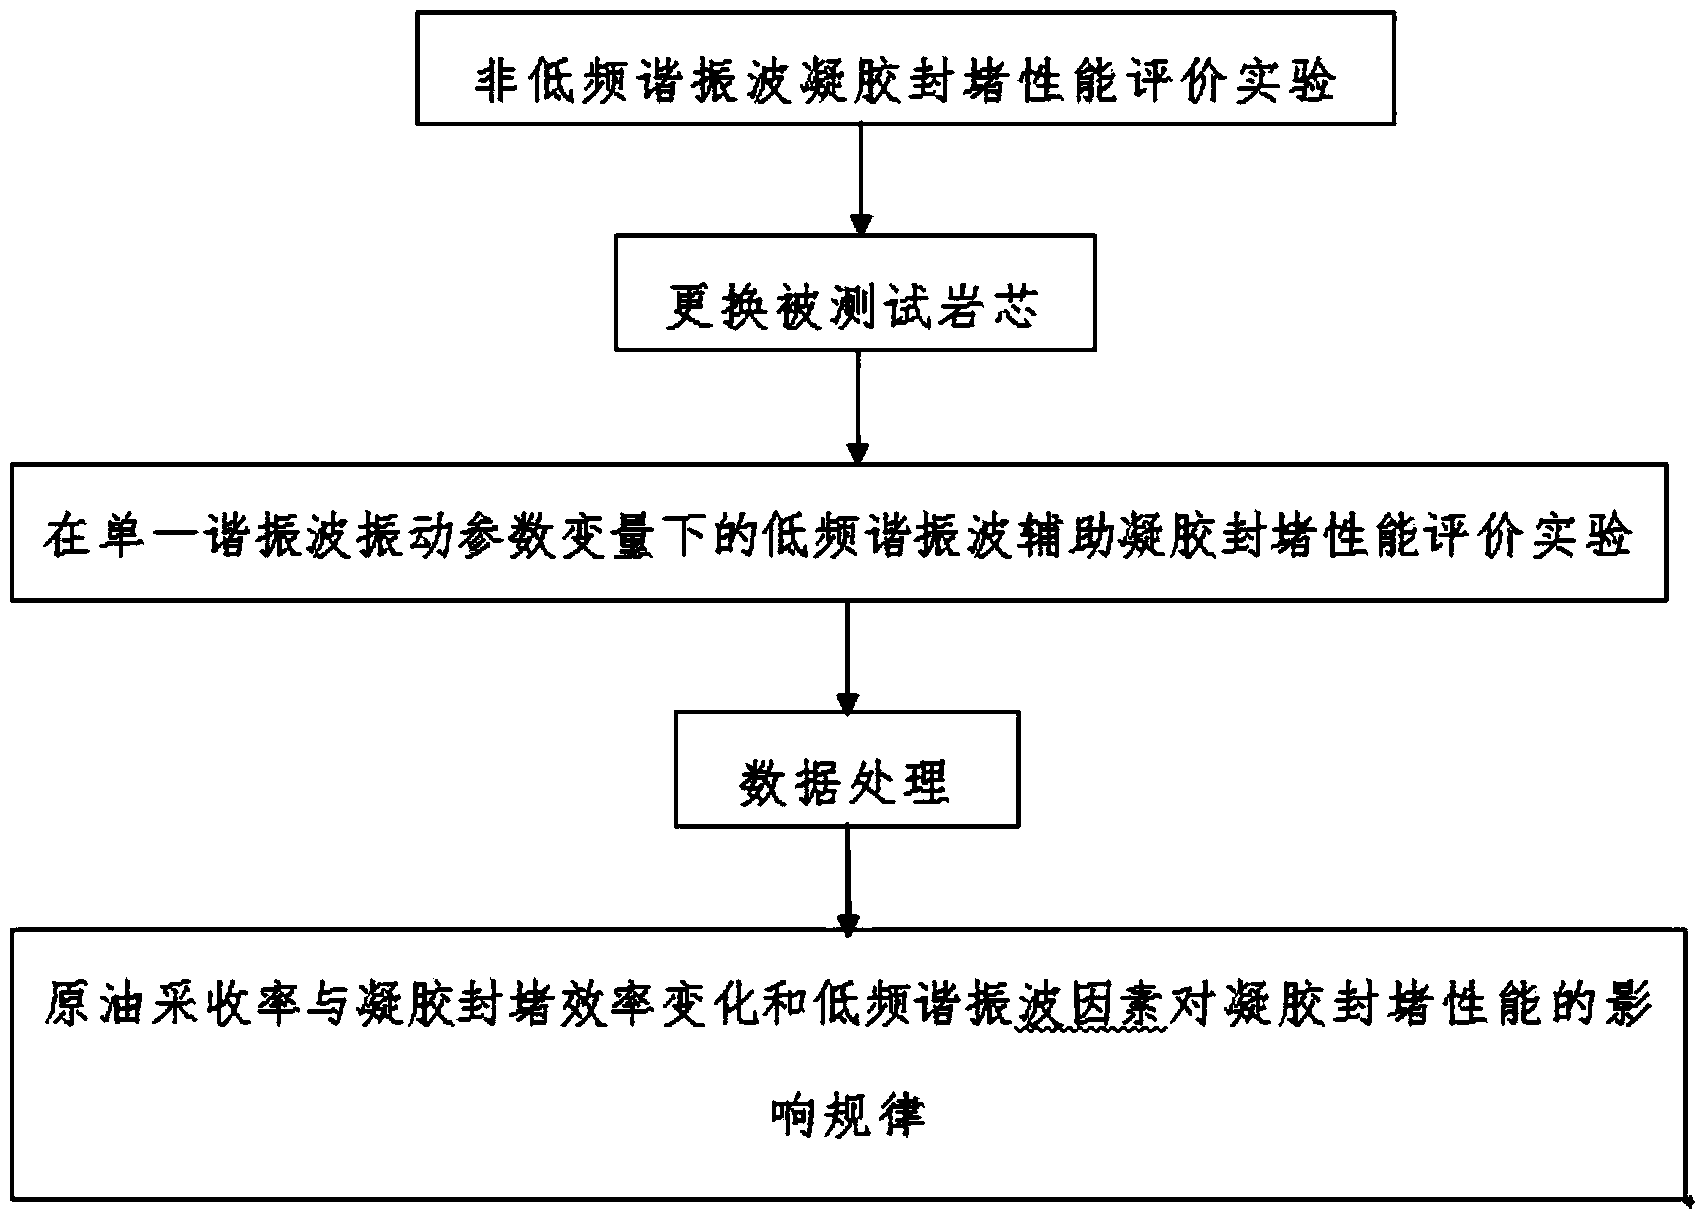 Low-frequency resonance wave assisted gel plugging performance evaluation testing device and method